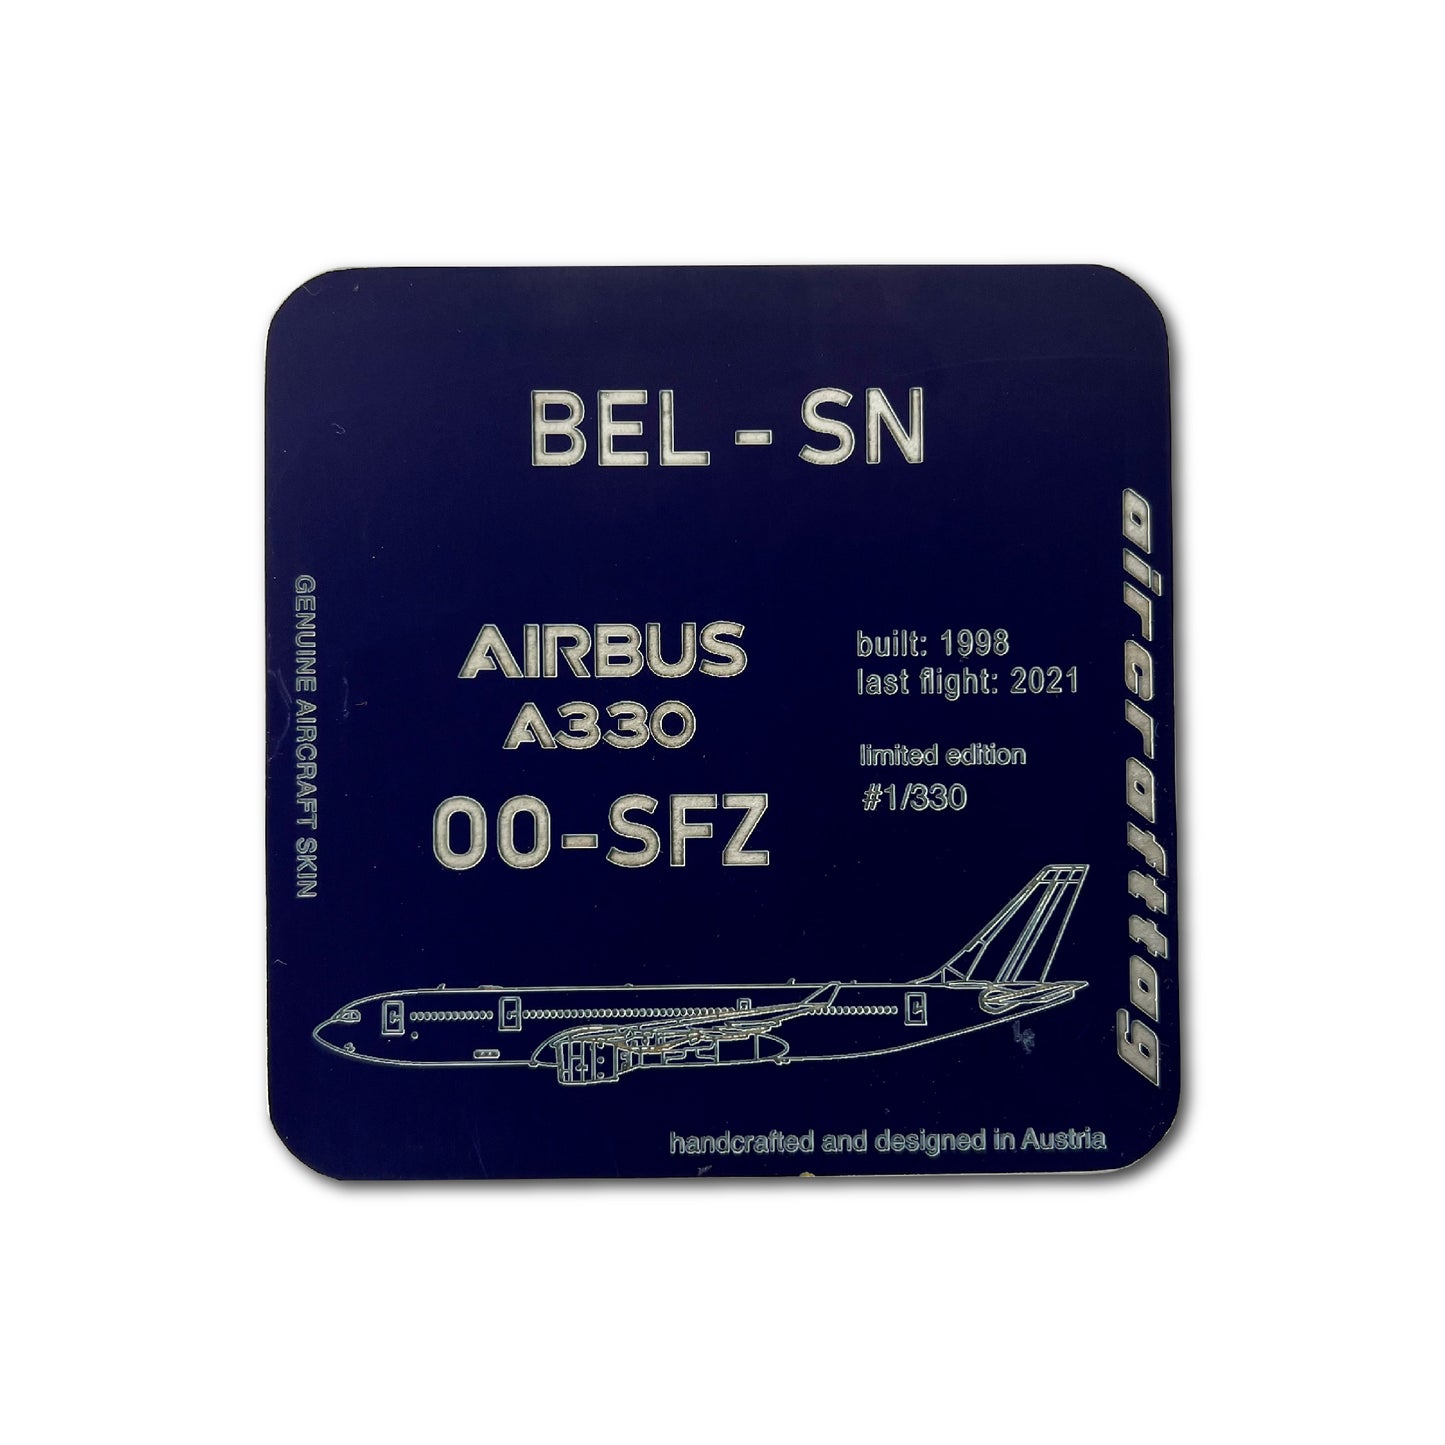 Coaster - Airbus A330 - OO-SFZ  - Brussels Airlines